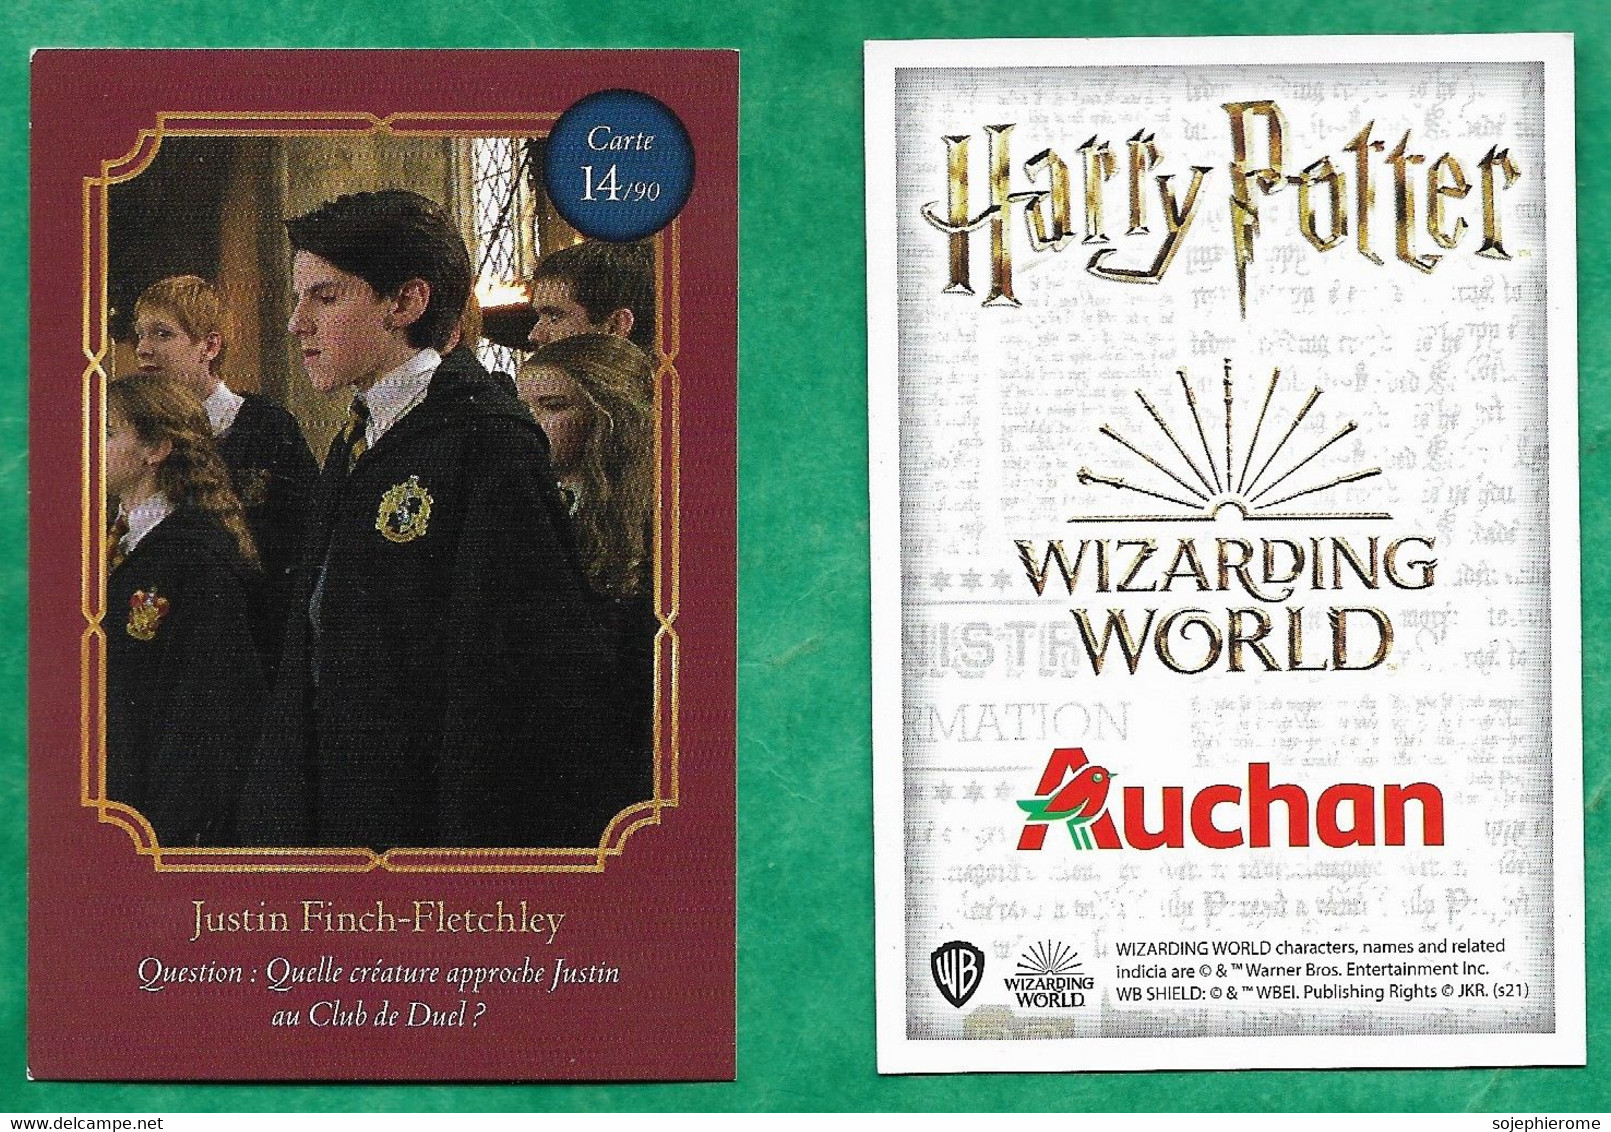 Auchan "Harry Potter Wizarding World" Justin Finch-Fletchley 14/90 - 2scans - Harry Potter